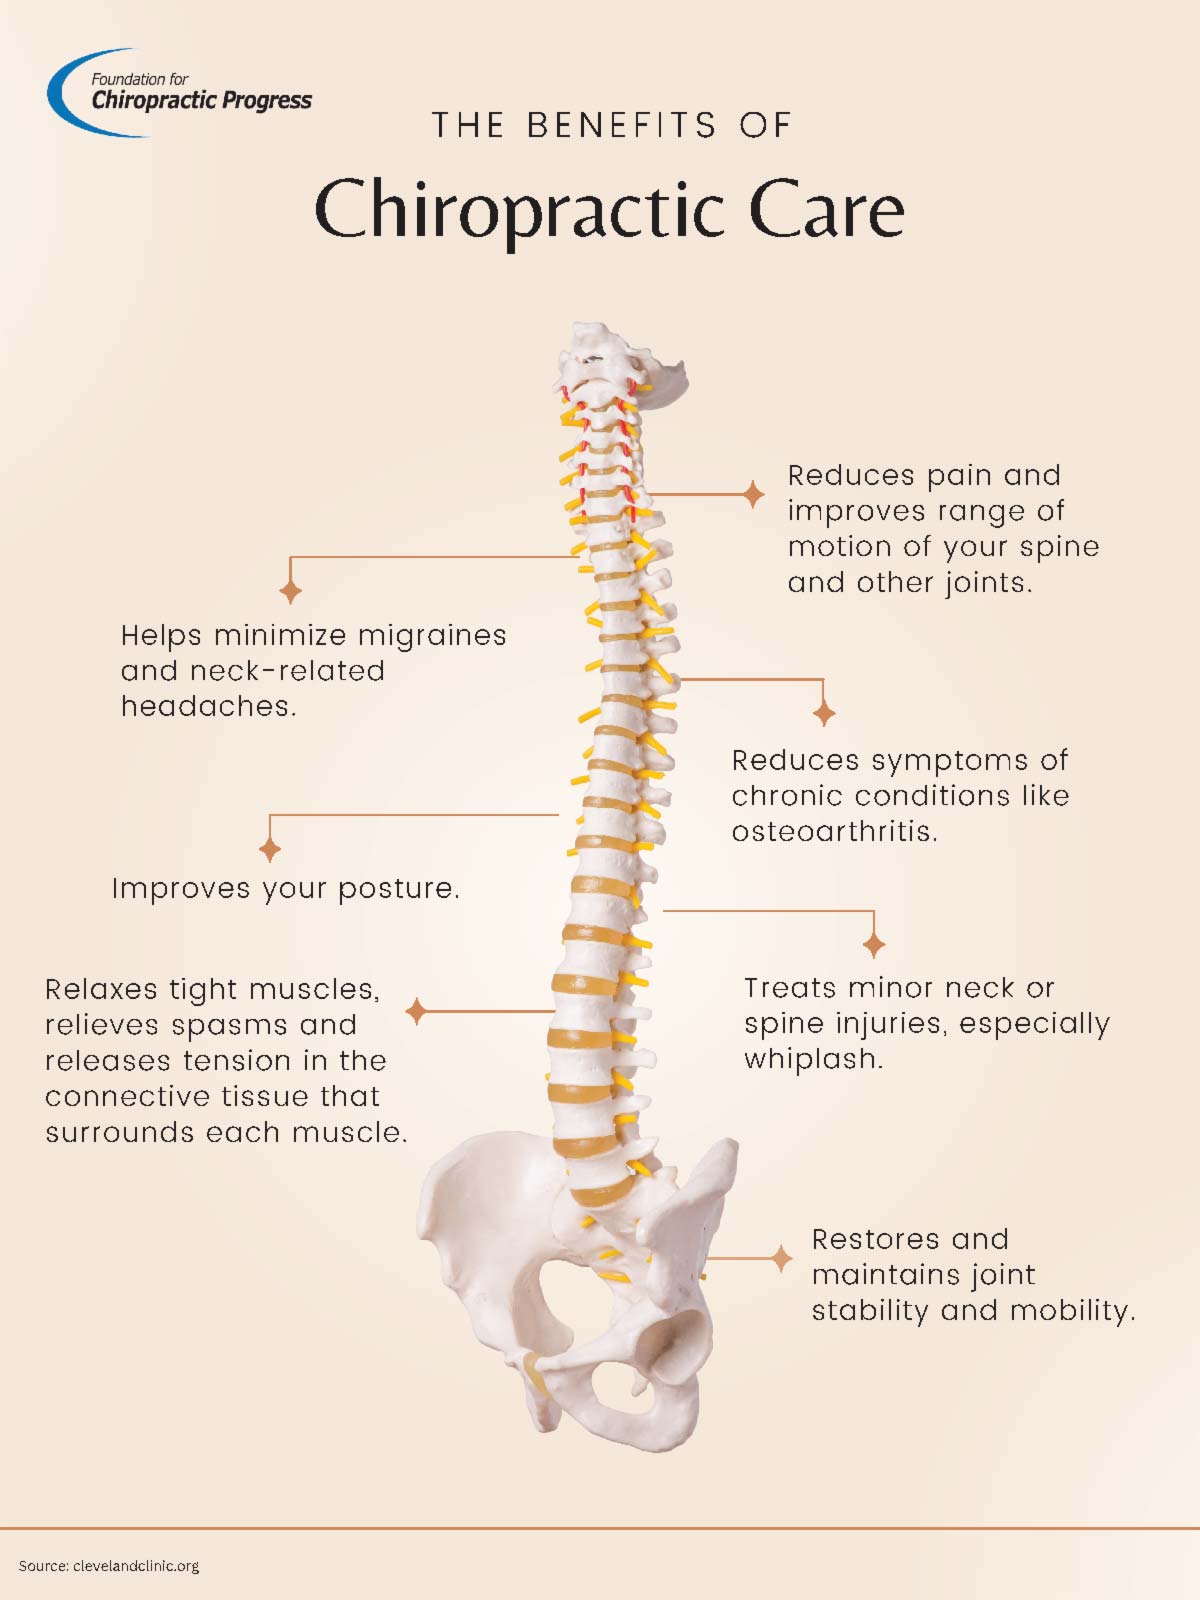 migraines care with chiropractic care; restore body with chiropractic care